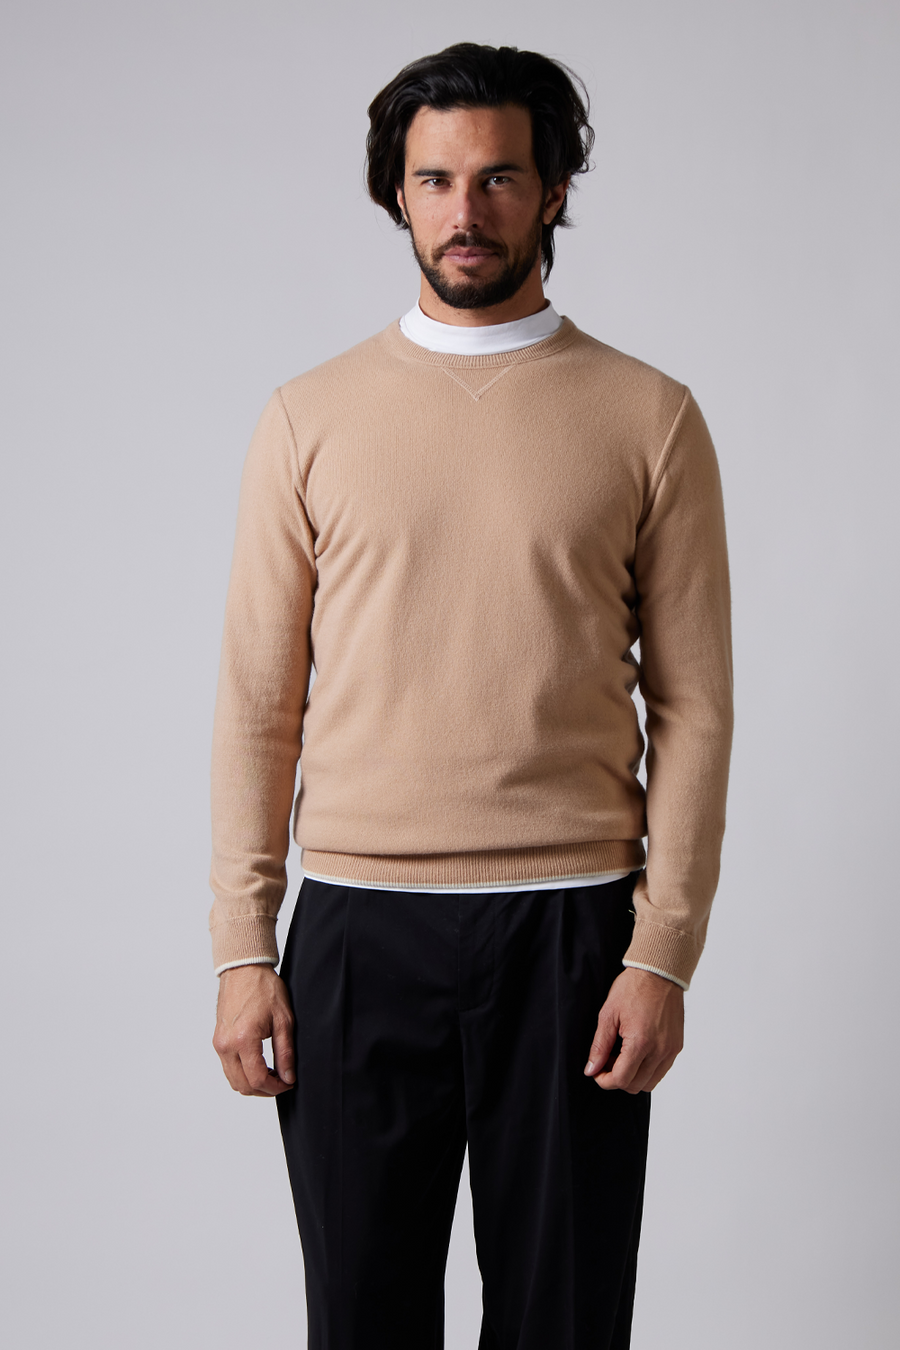 Buy the Daniele Fiesoli Wool Round Neck Sweater Beige at Intro. Spend £50 for free UK delivery. Official stockists. We ship worldwide.